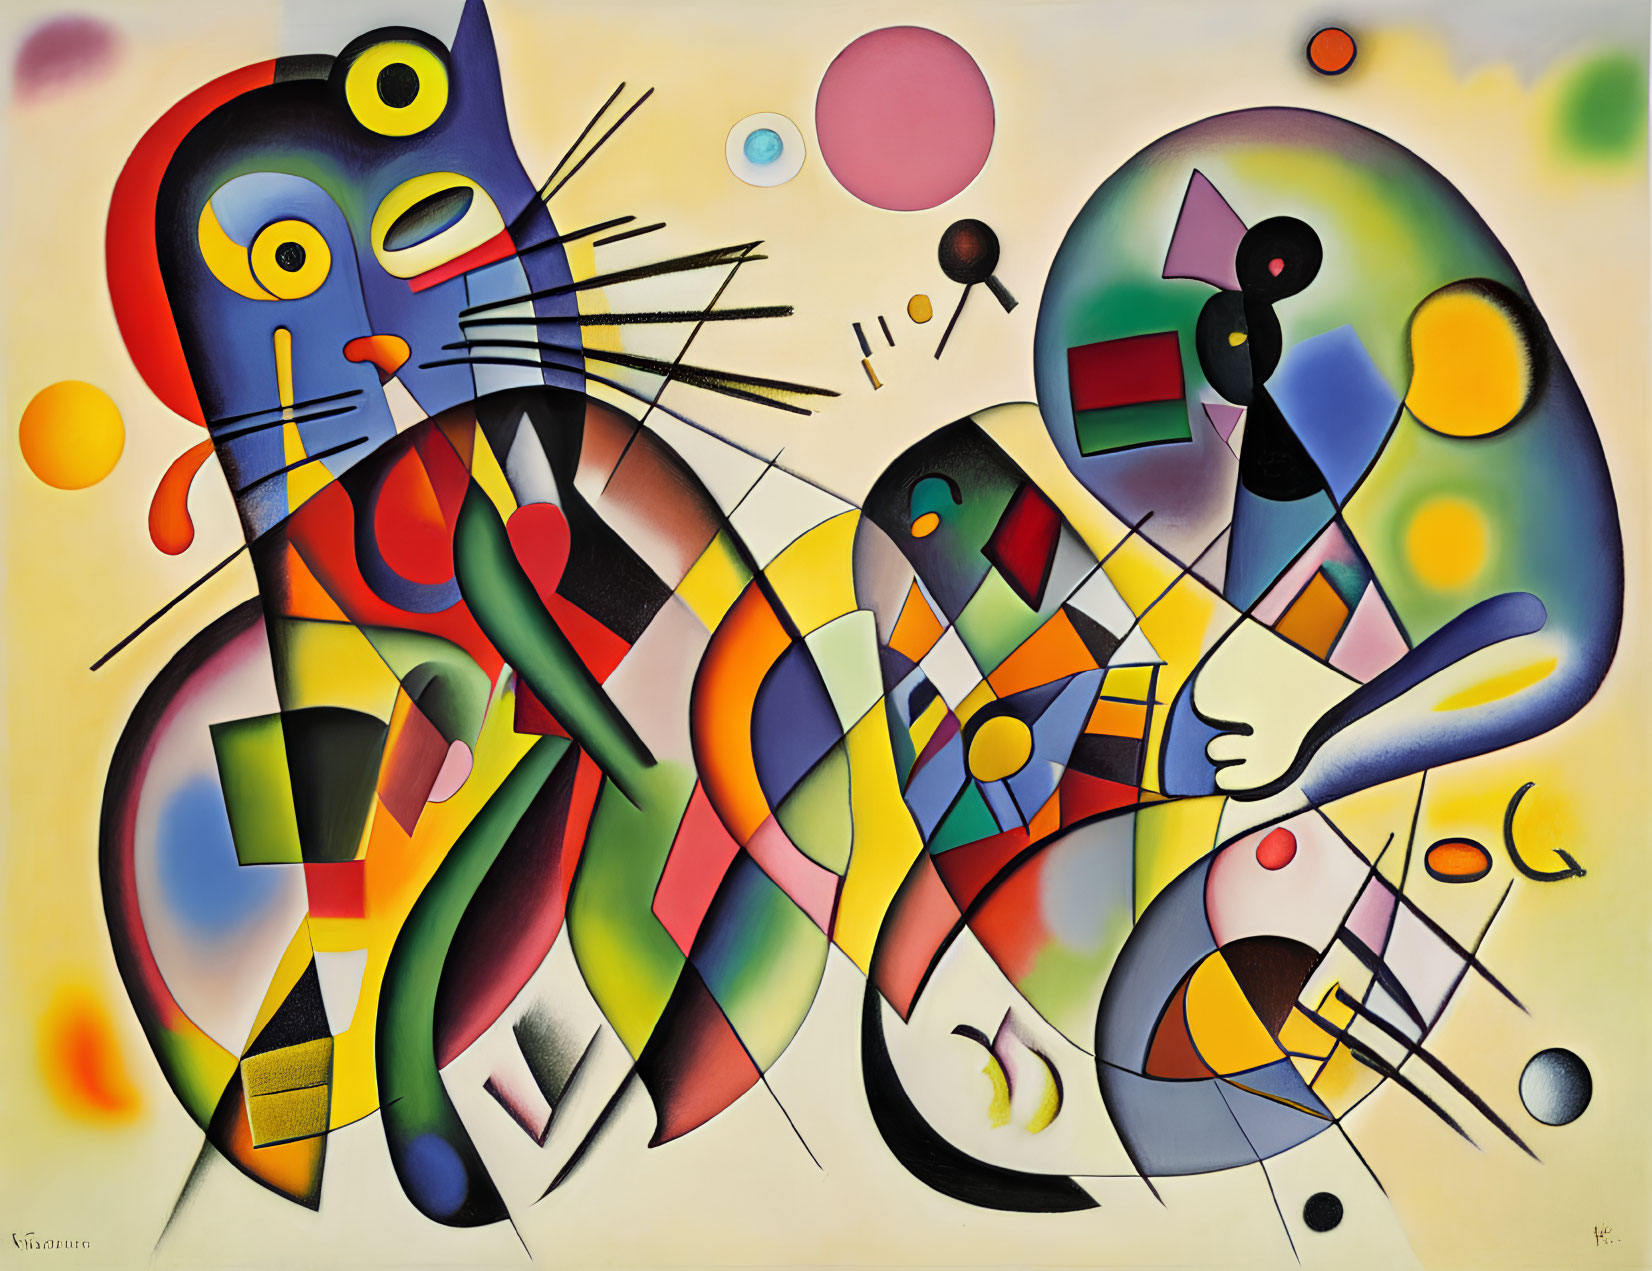 Colorful Abstract Painting: Stylized Cats with Geometric Patterns